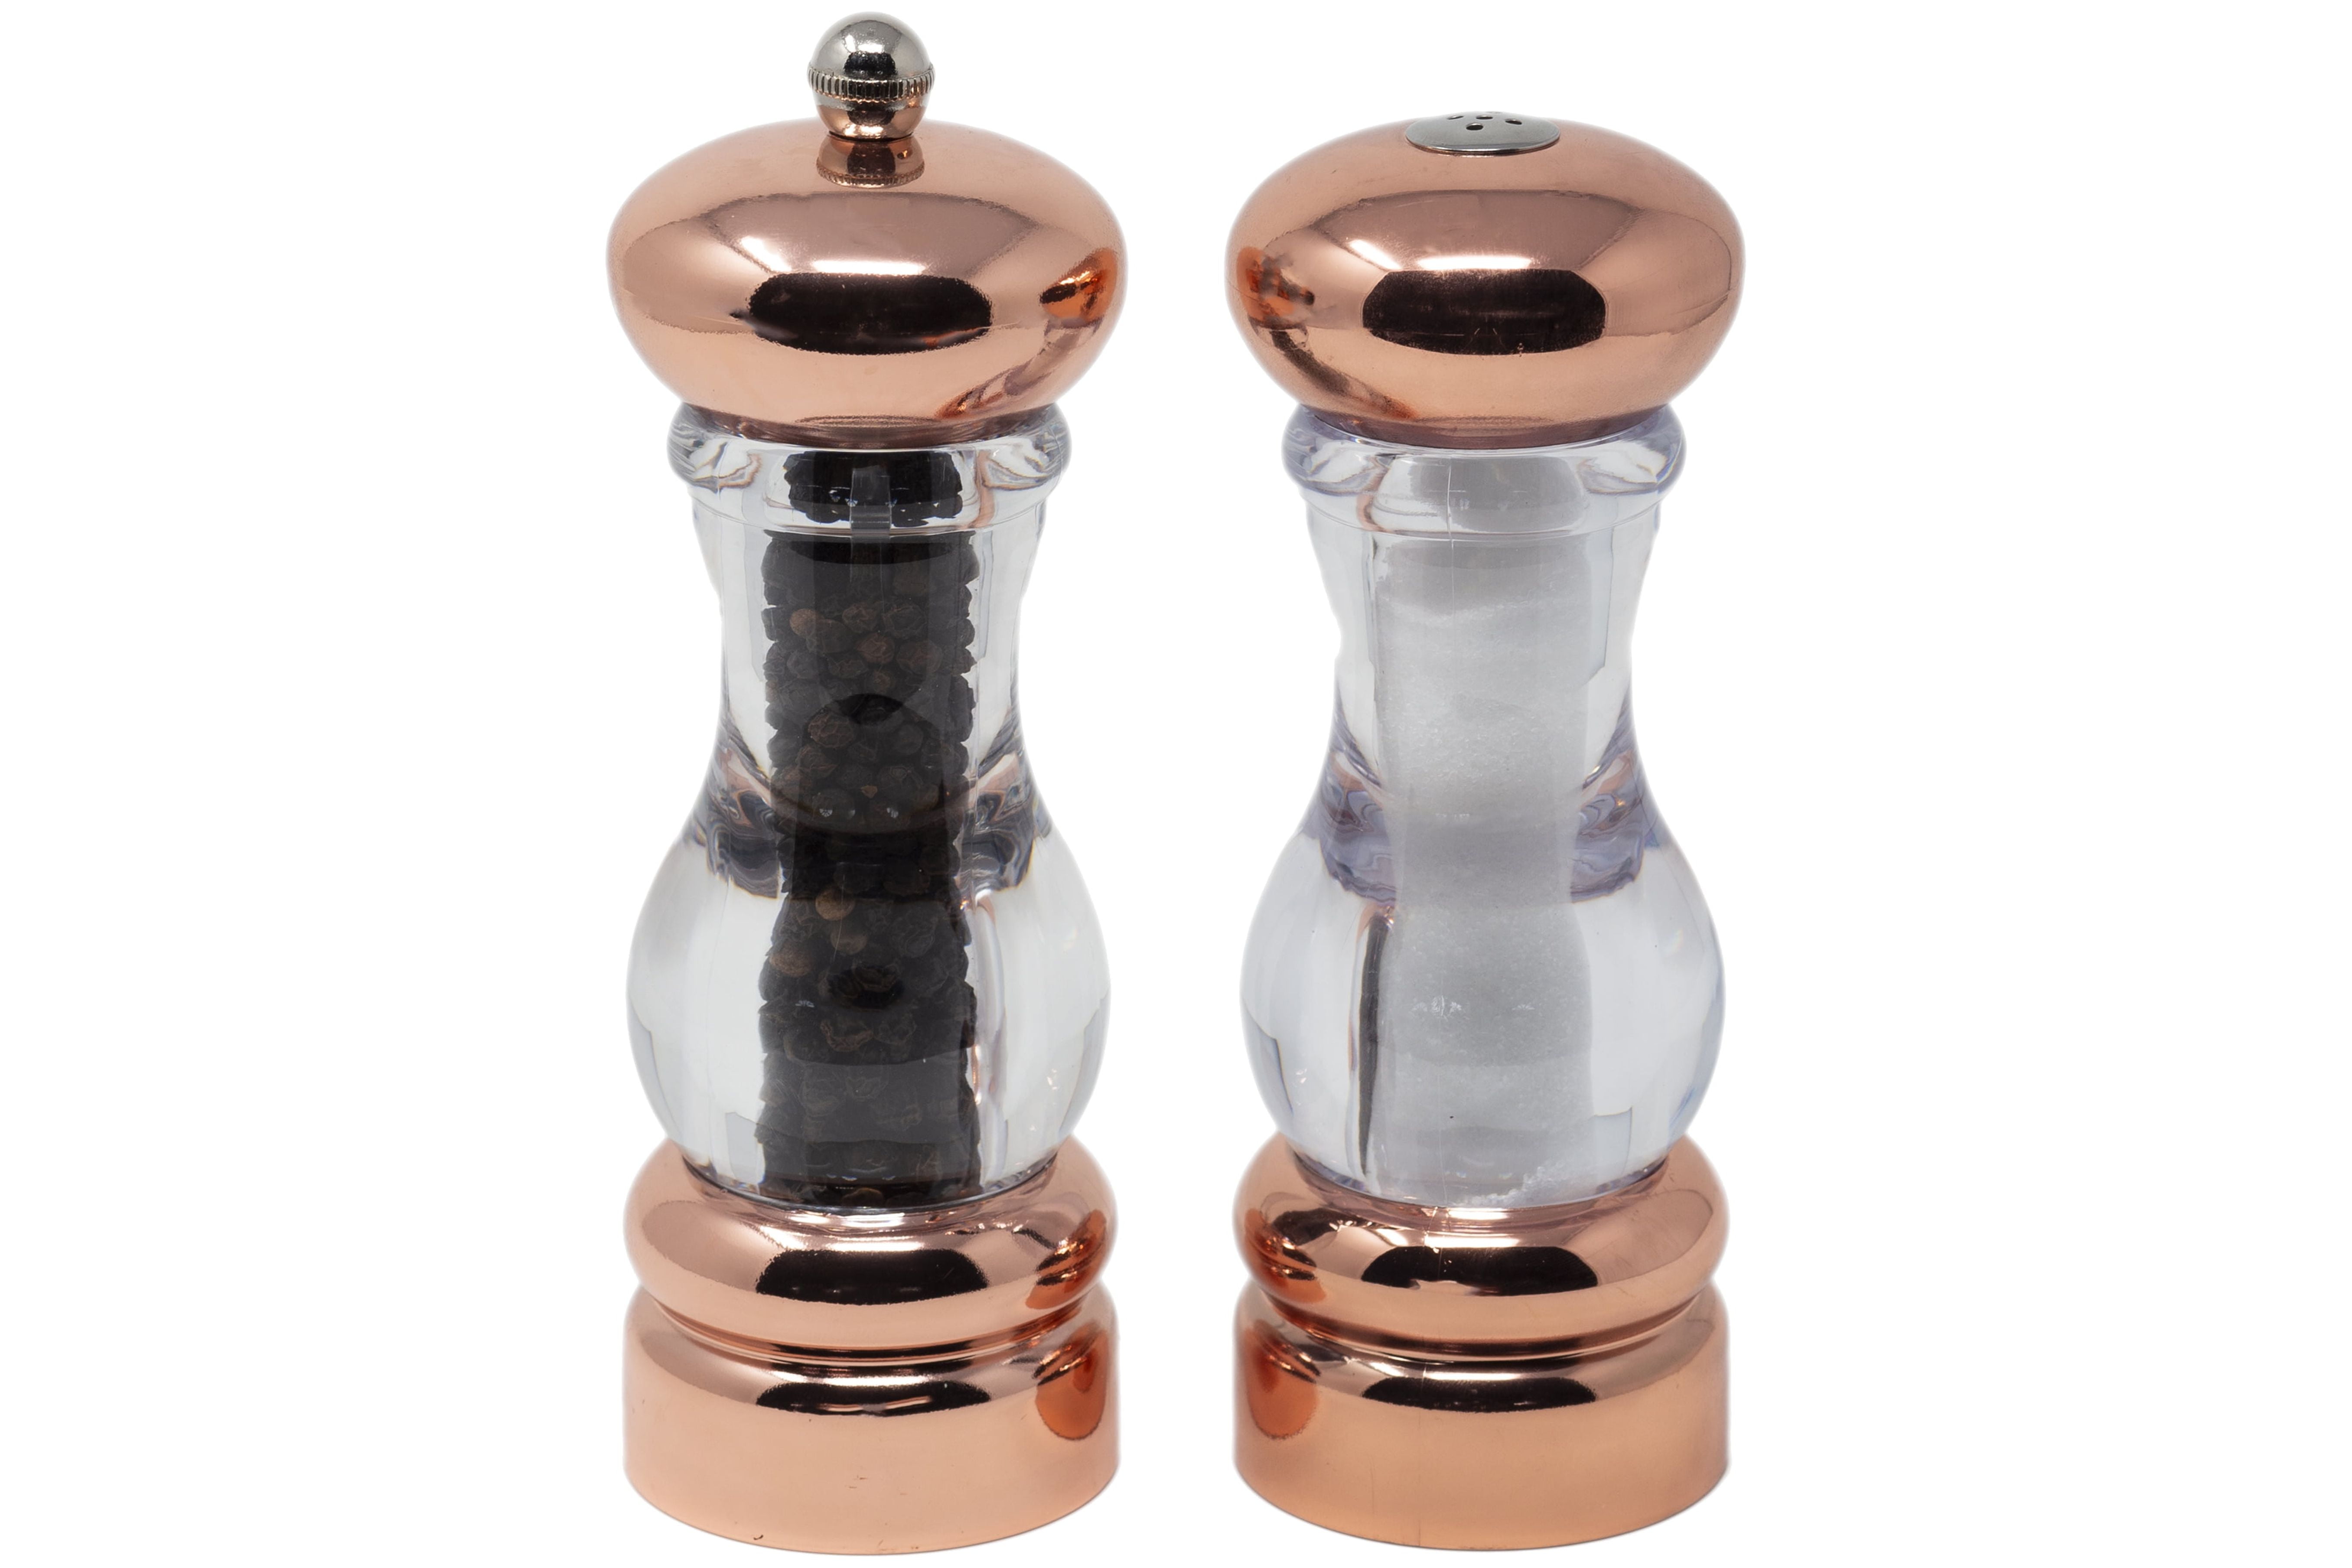 Olde Thompson Harrison Salt and Pepper Shakers, Set of Two